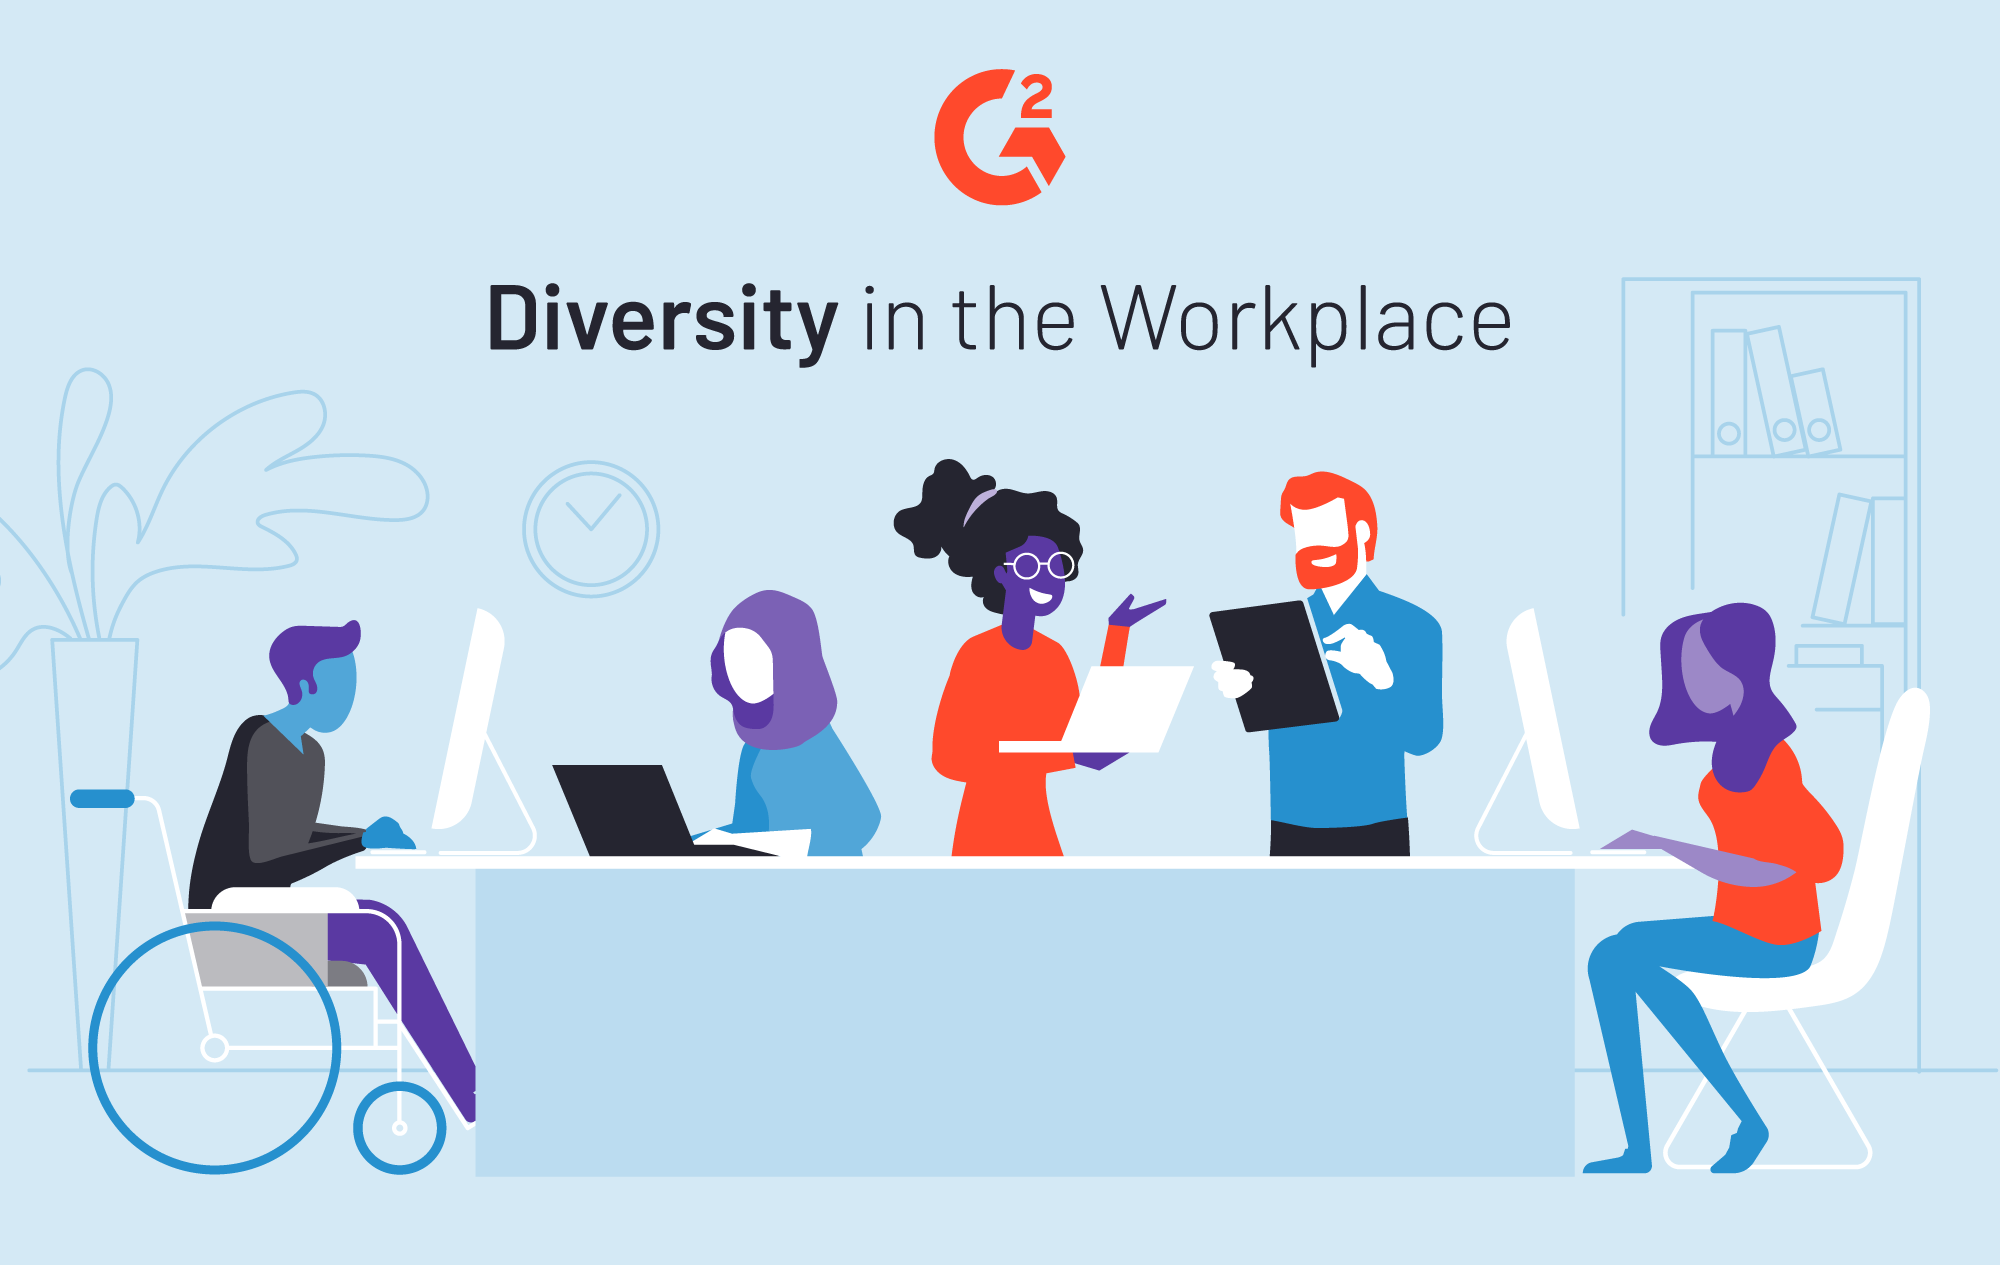 research paper on diversity and inclusion in the workplace